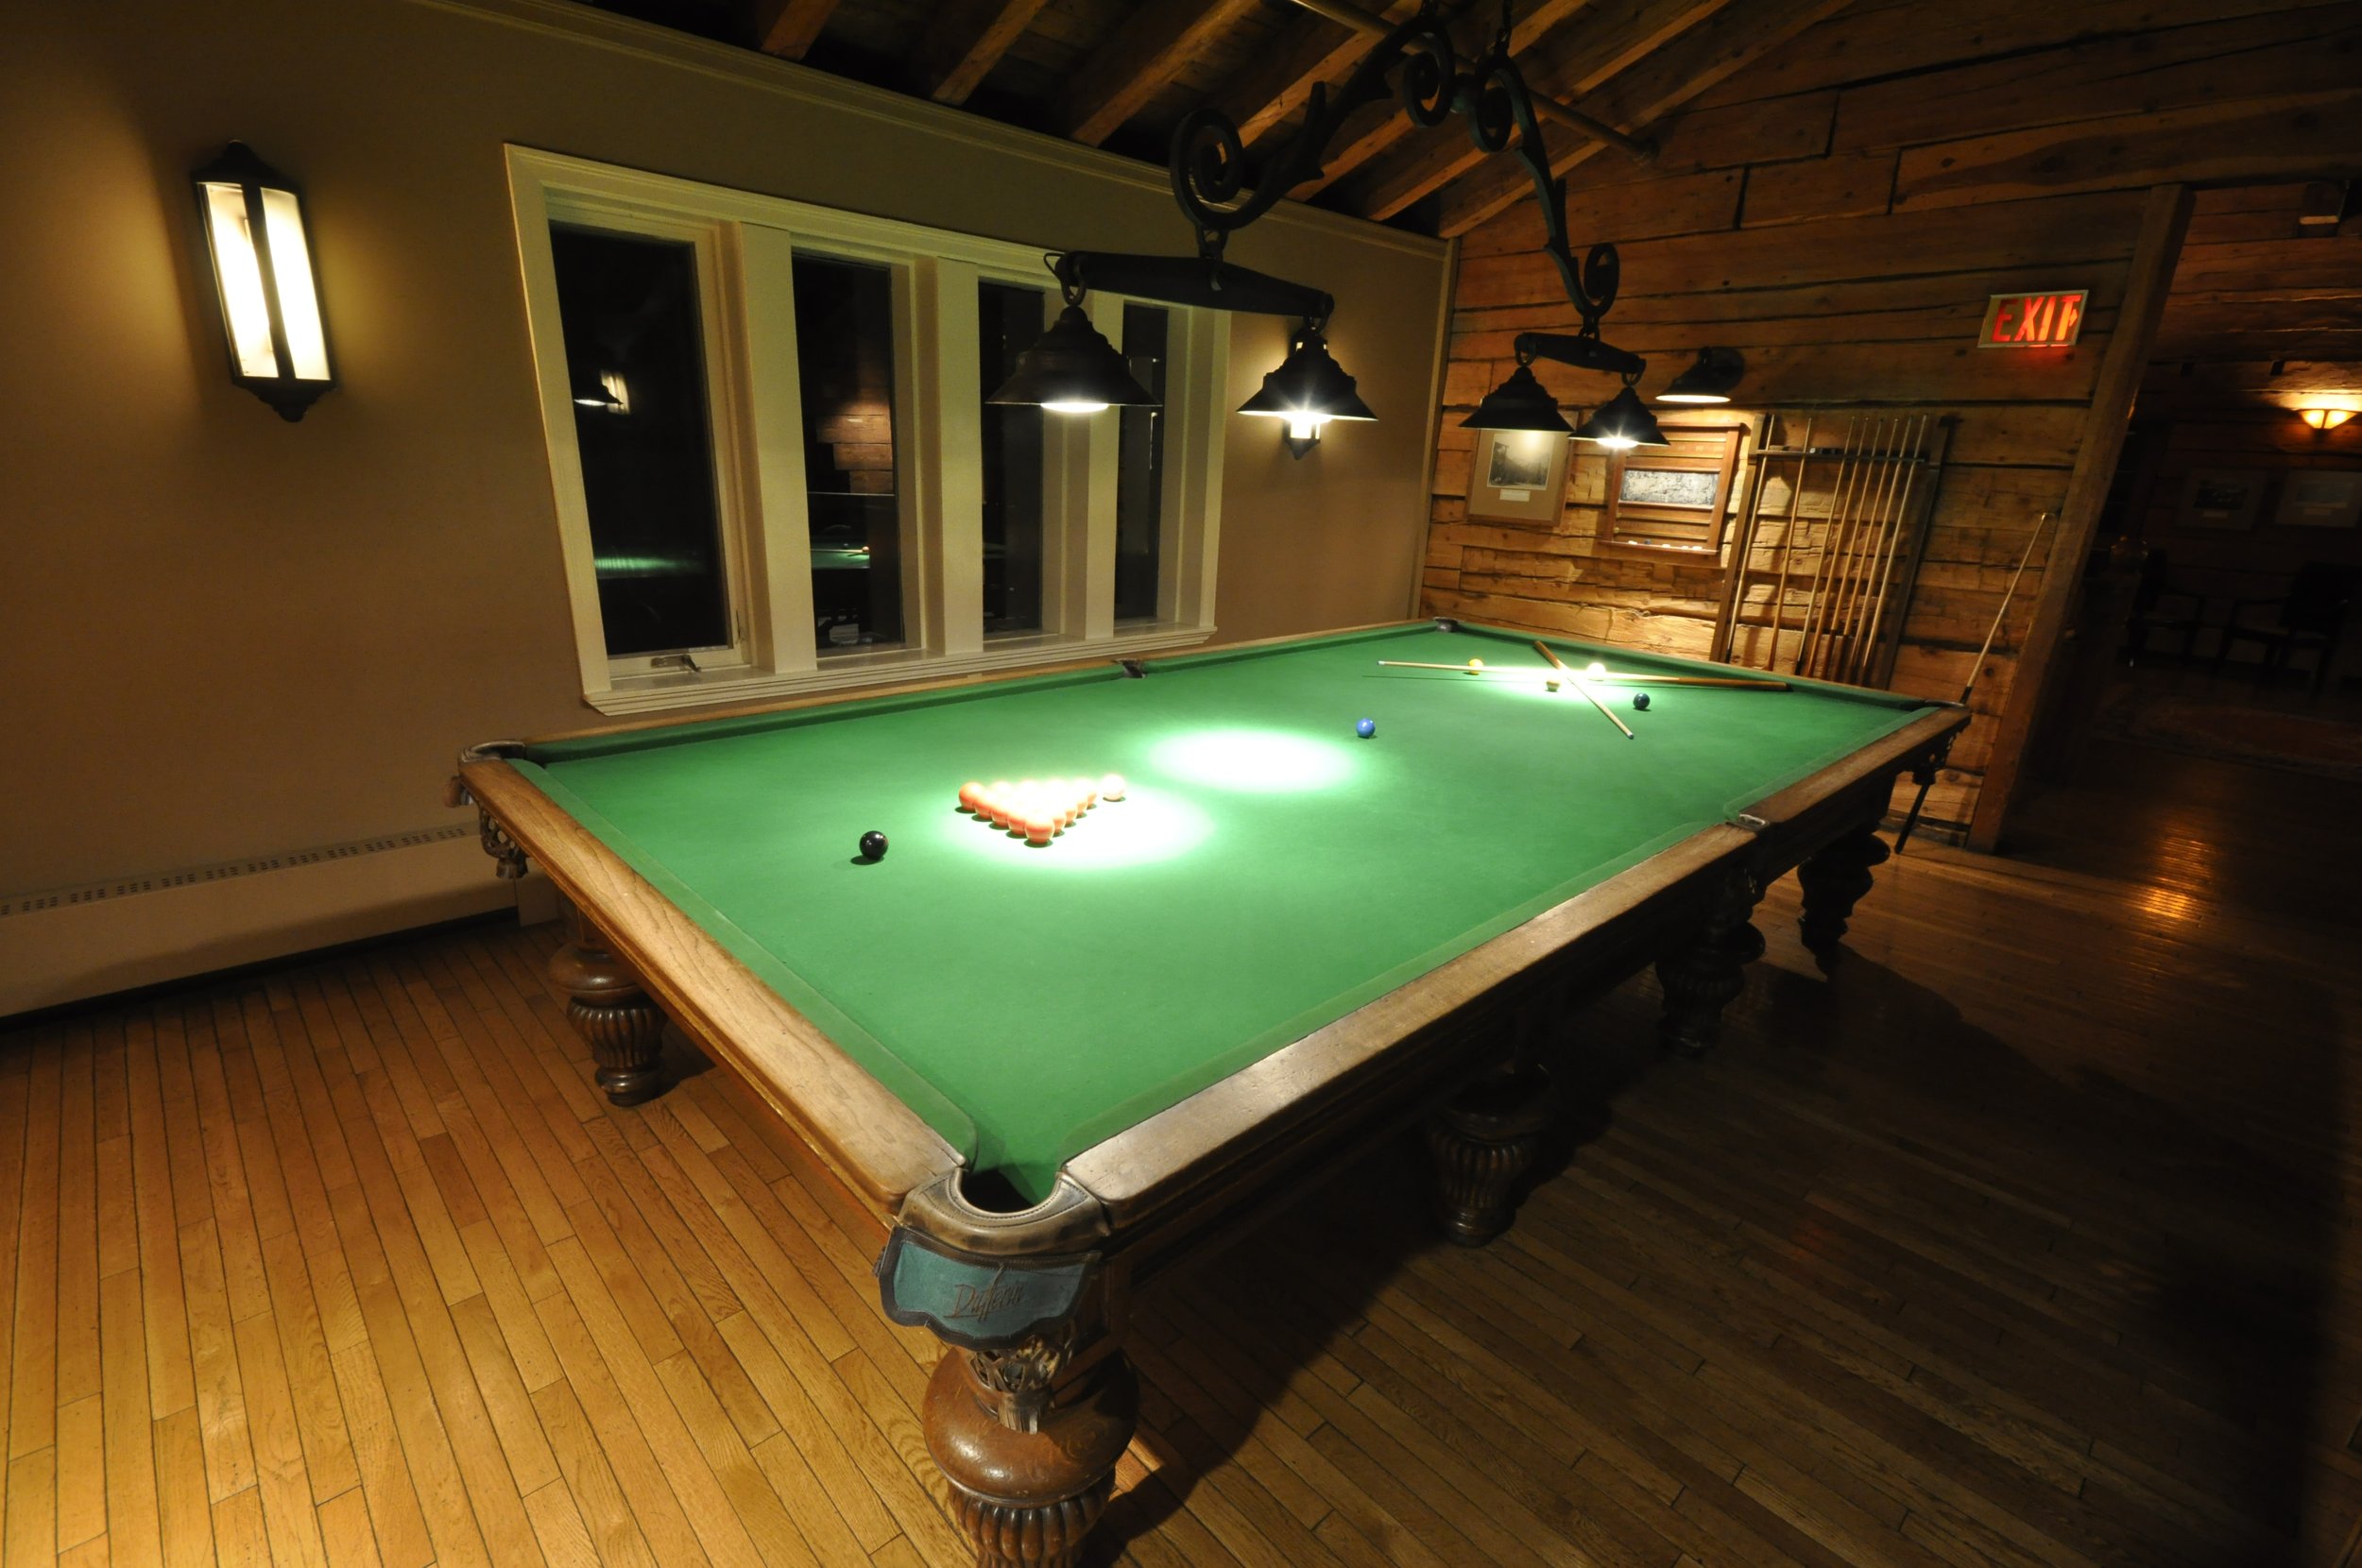  Pool table. Photo by Tera Swanson 